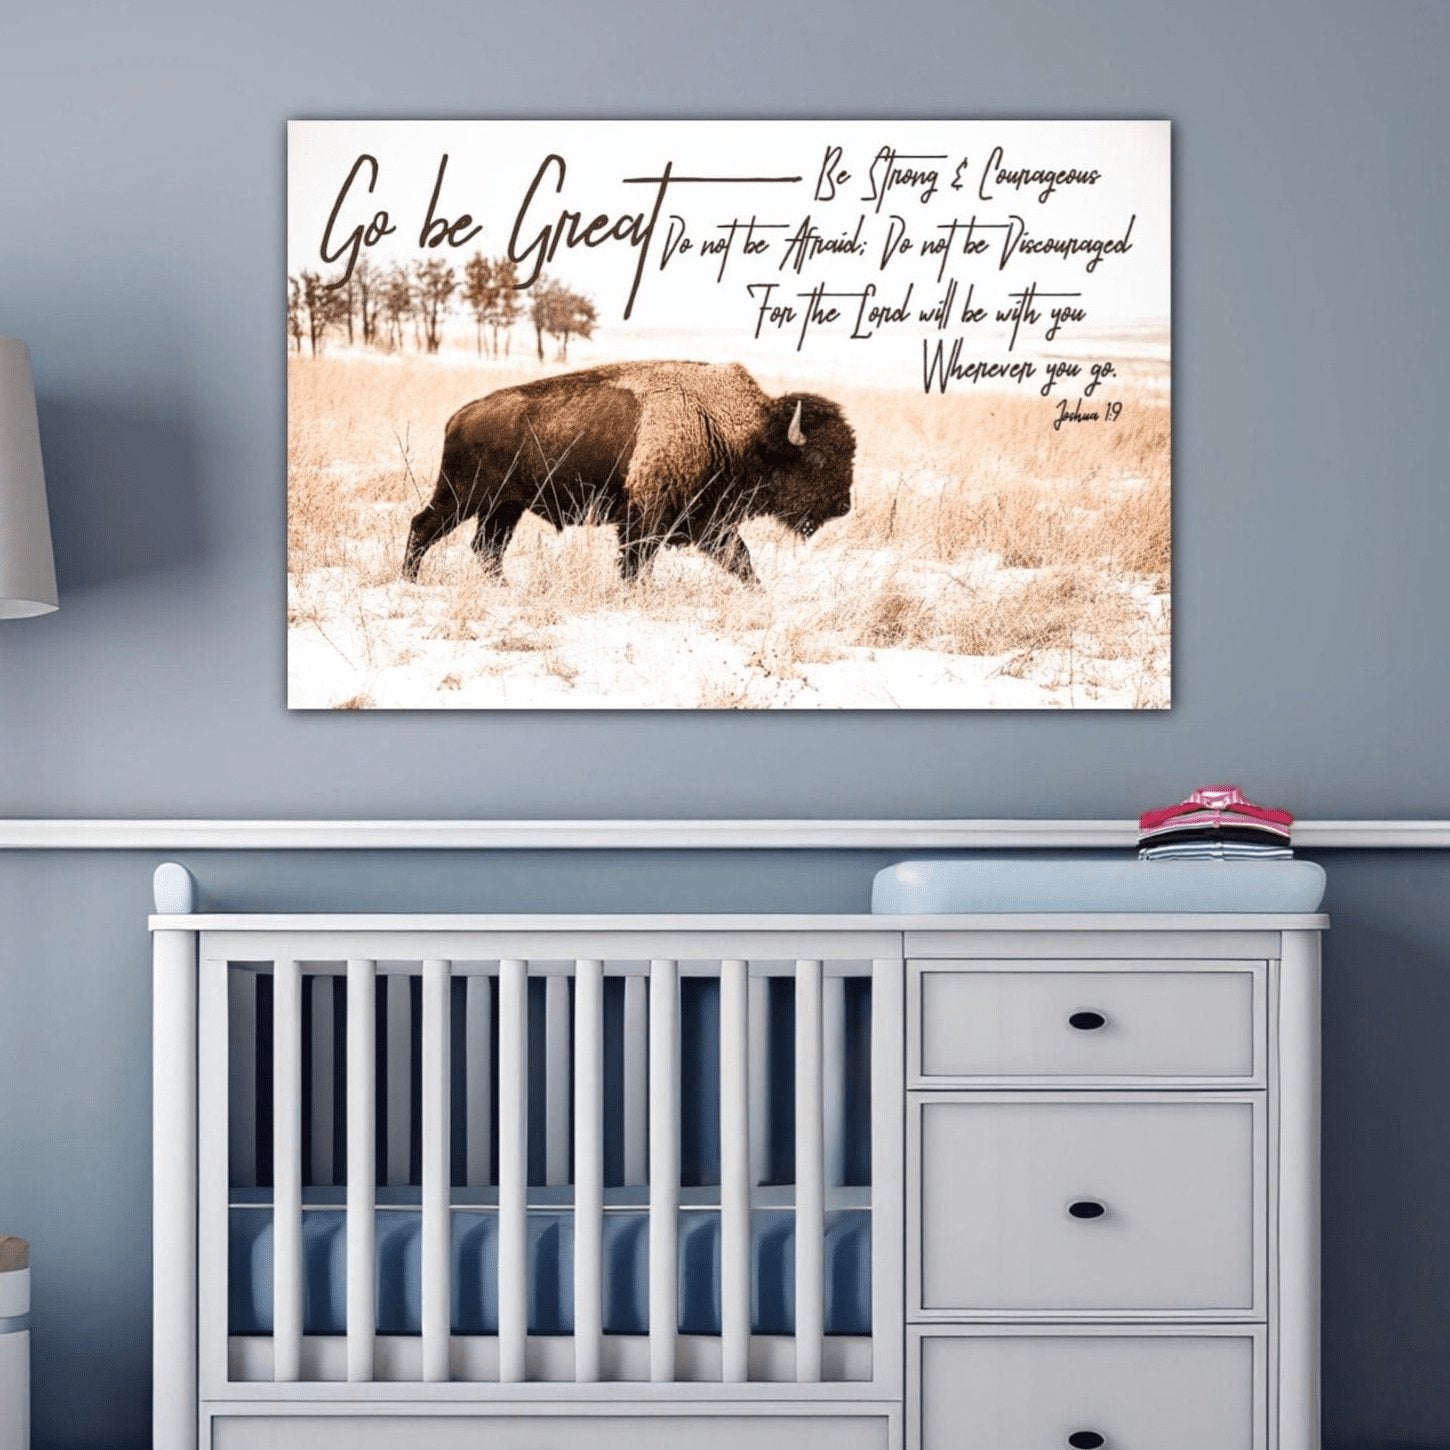 Western nursery wall art decor, bison walking in snow and the "go be great" bible verse.